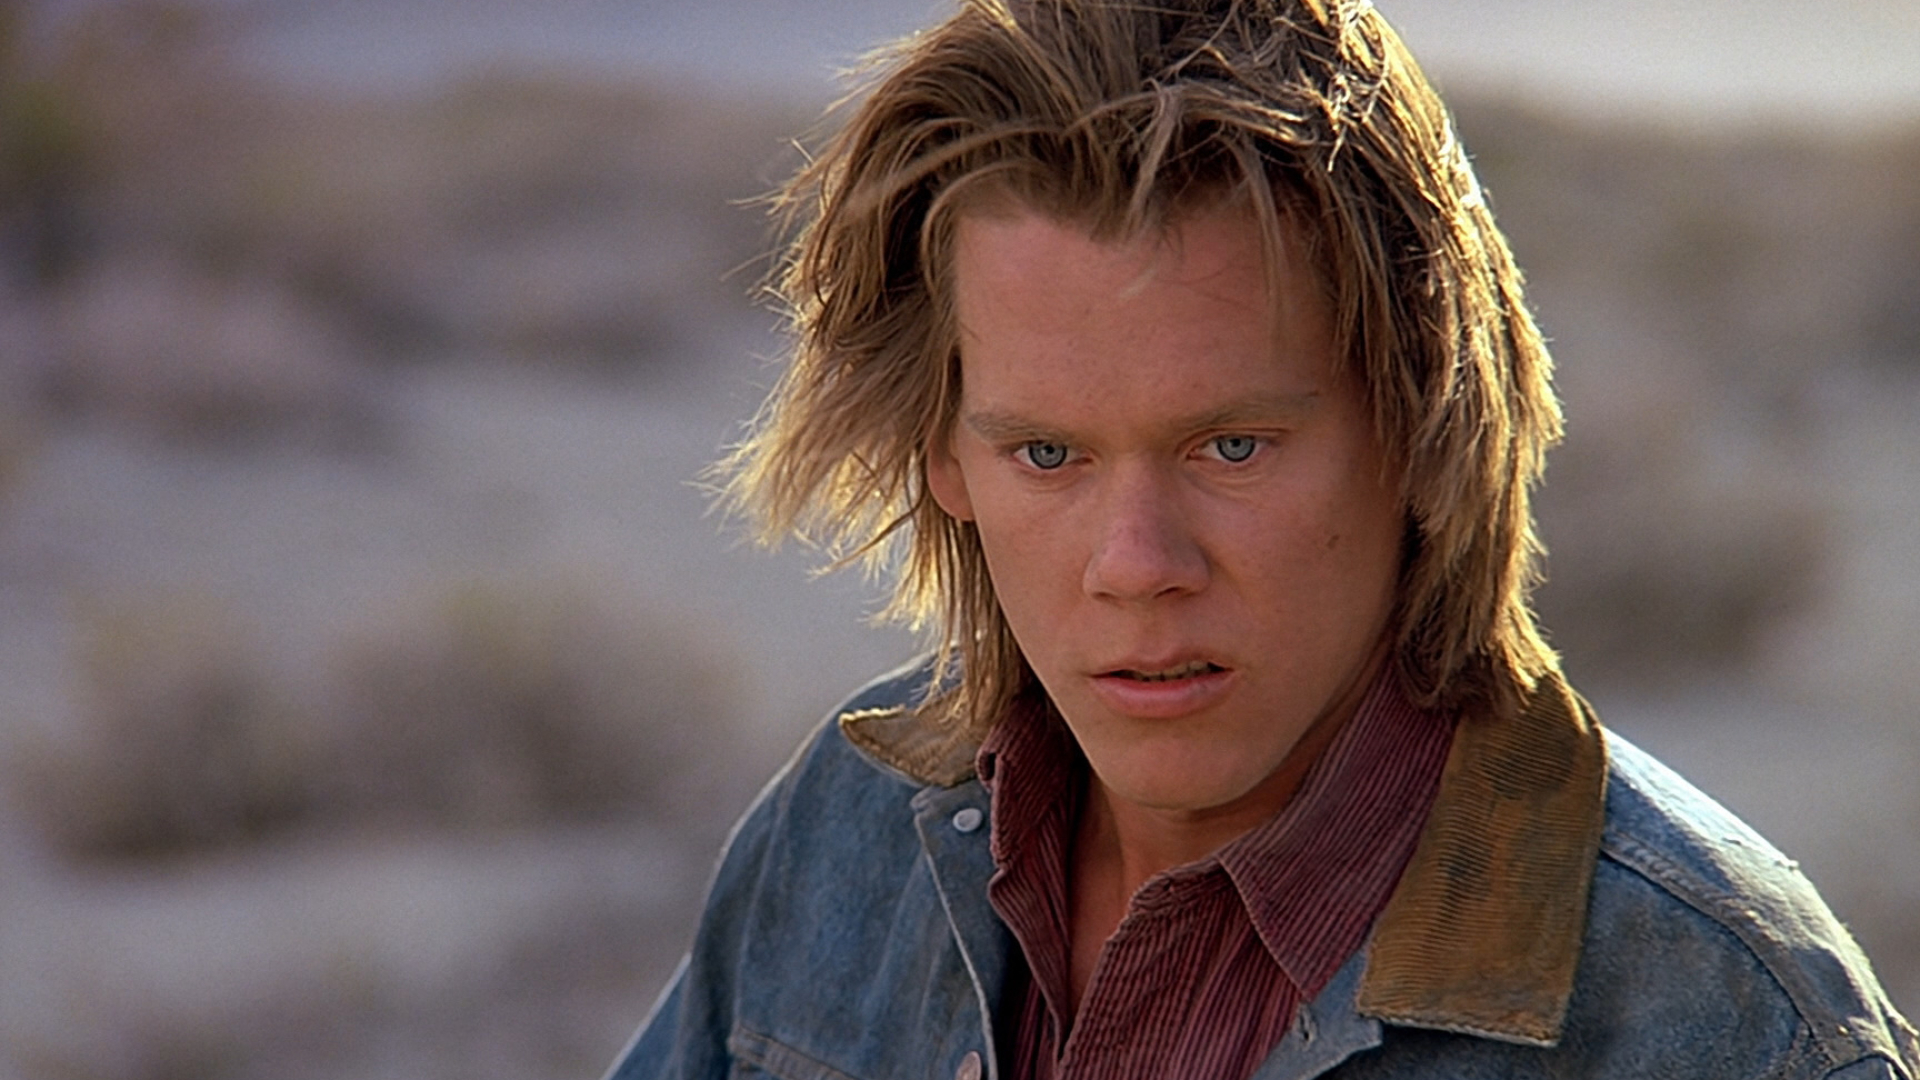 Kevin Bacon, Tremors Return, Dread Central, Explore 38 young wallpapers, 1920x1080 Full HD Desktop